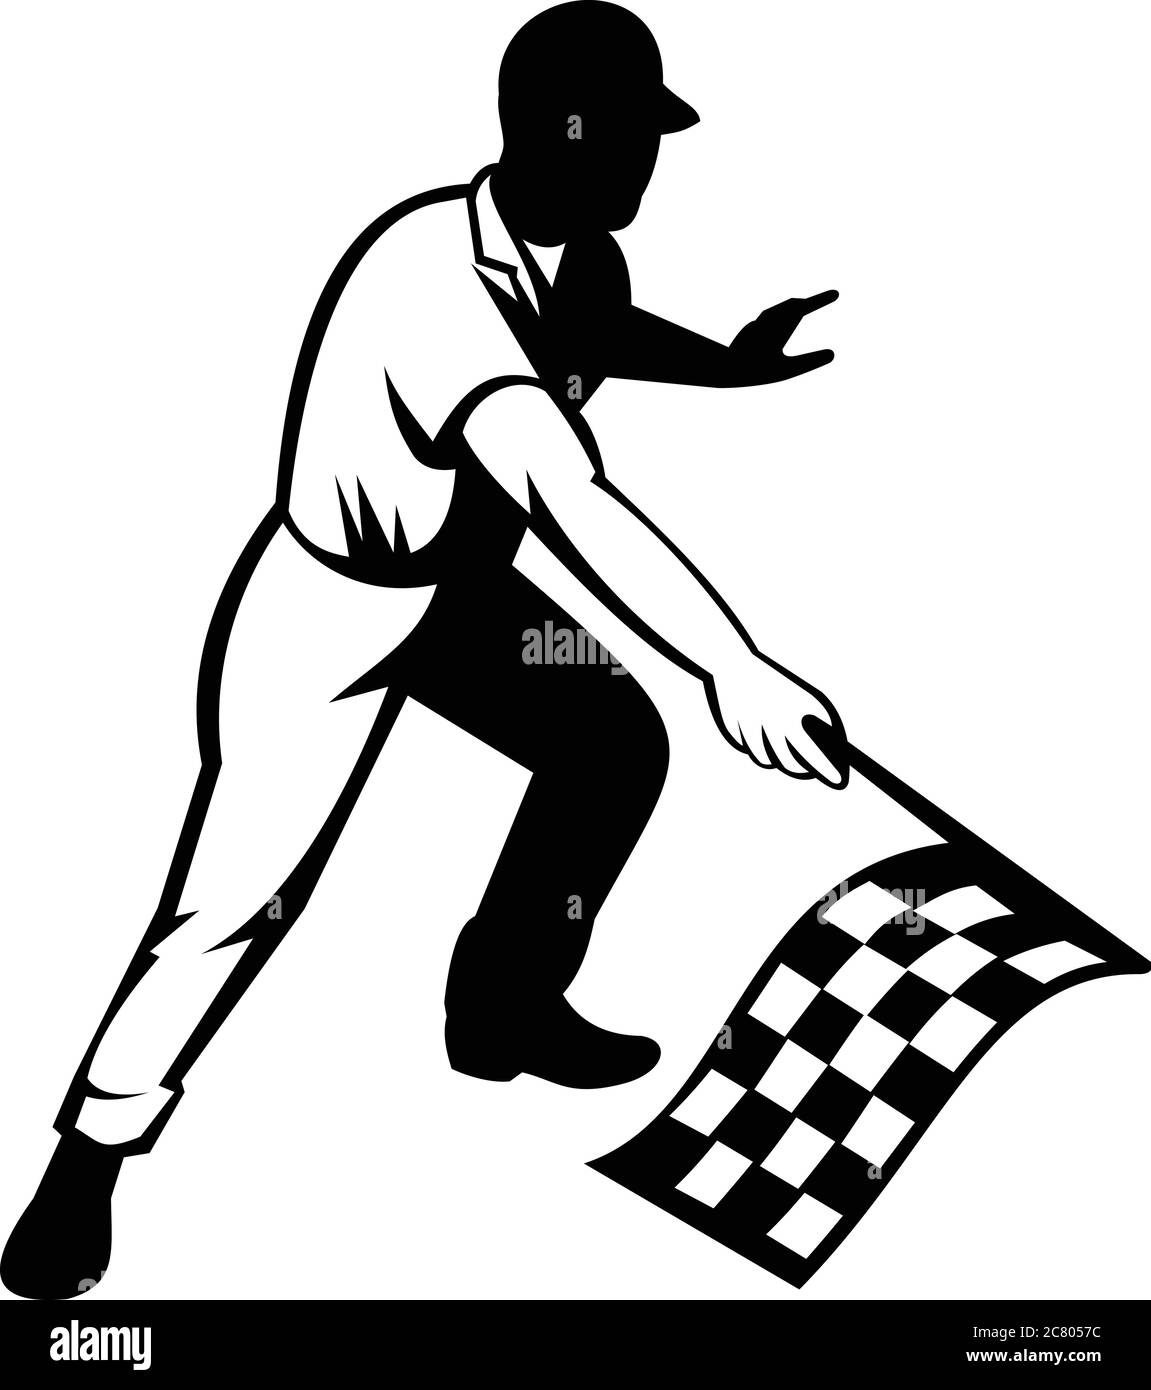 Retro woodcut black and white style illustration of a flagman or race official waving a checkered or chequered flag at start finish line indicating ra Stock Vector